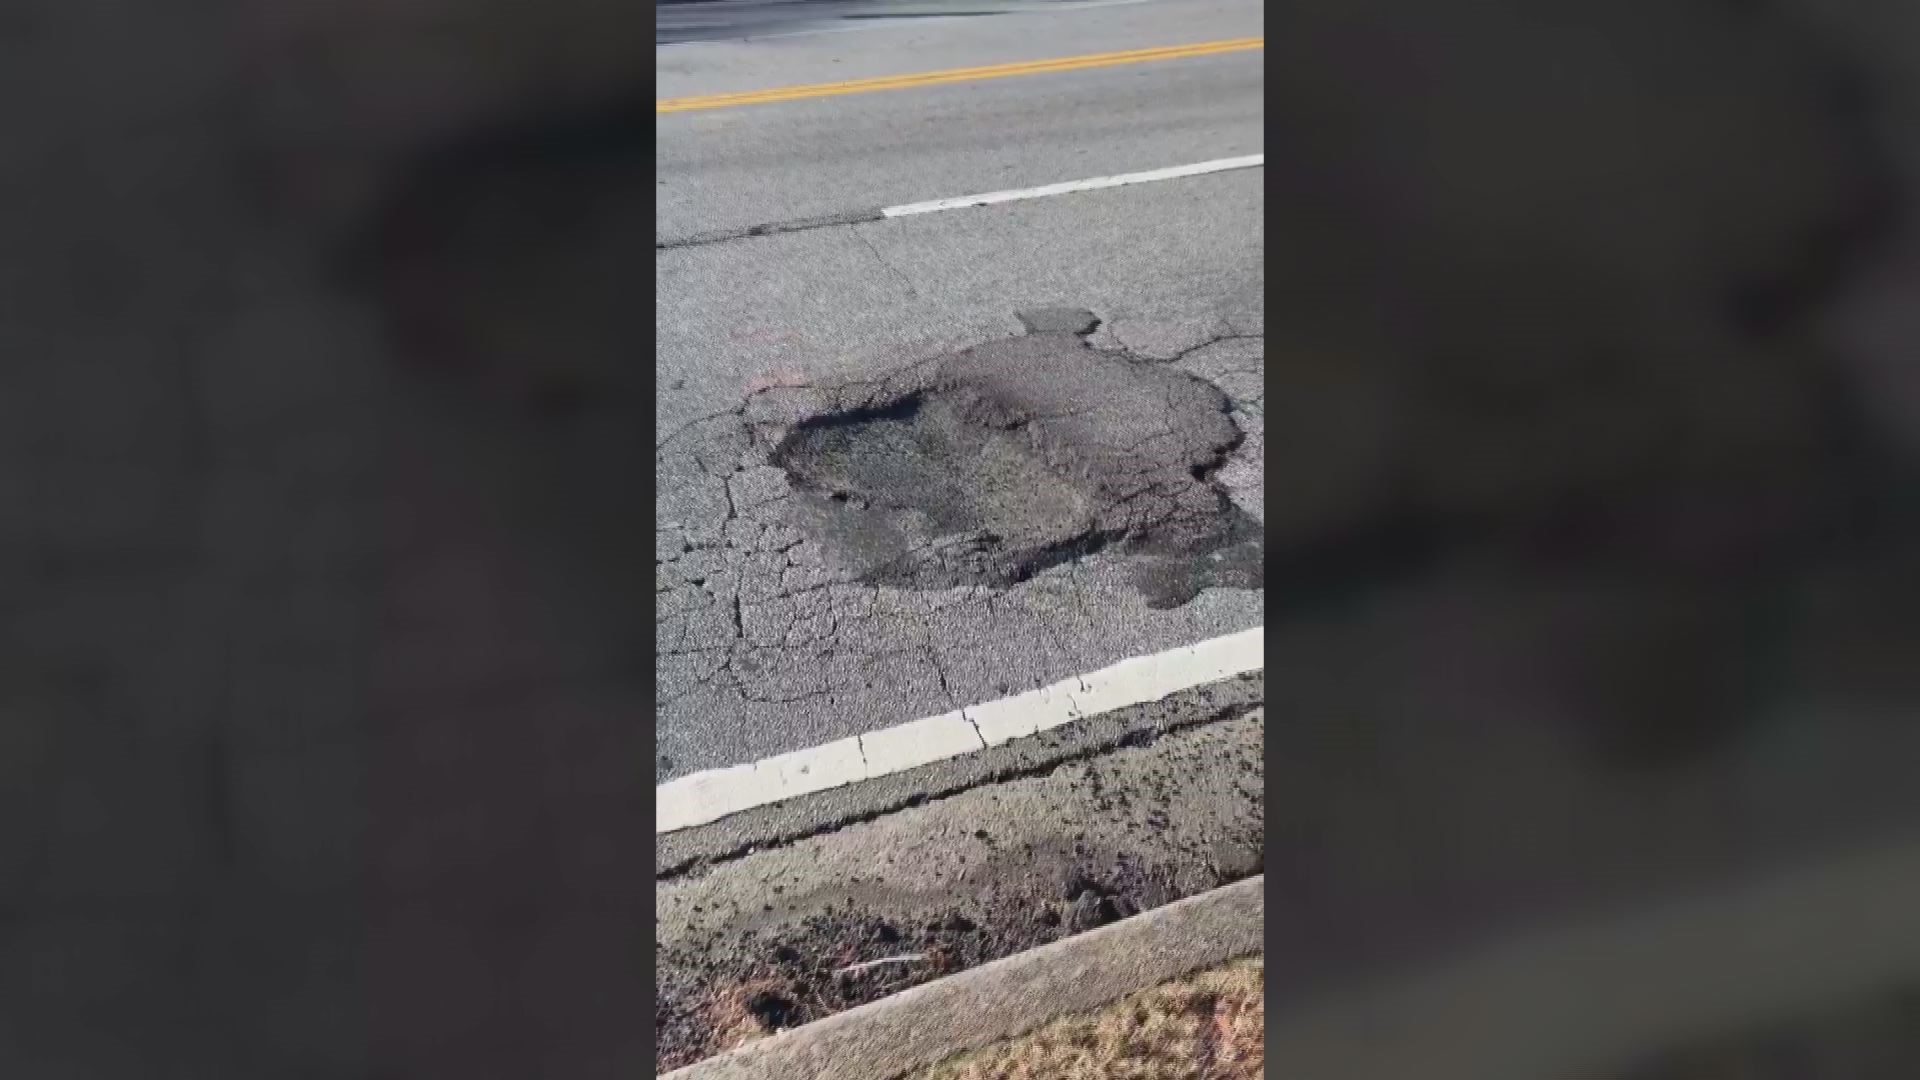 "This pothole has a trophy collection."